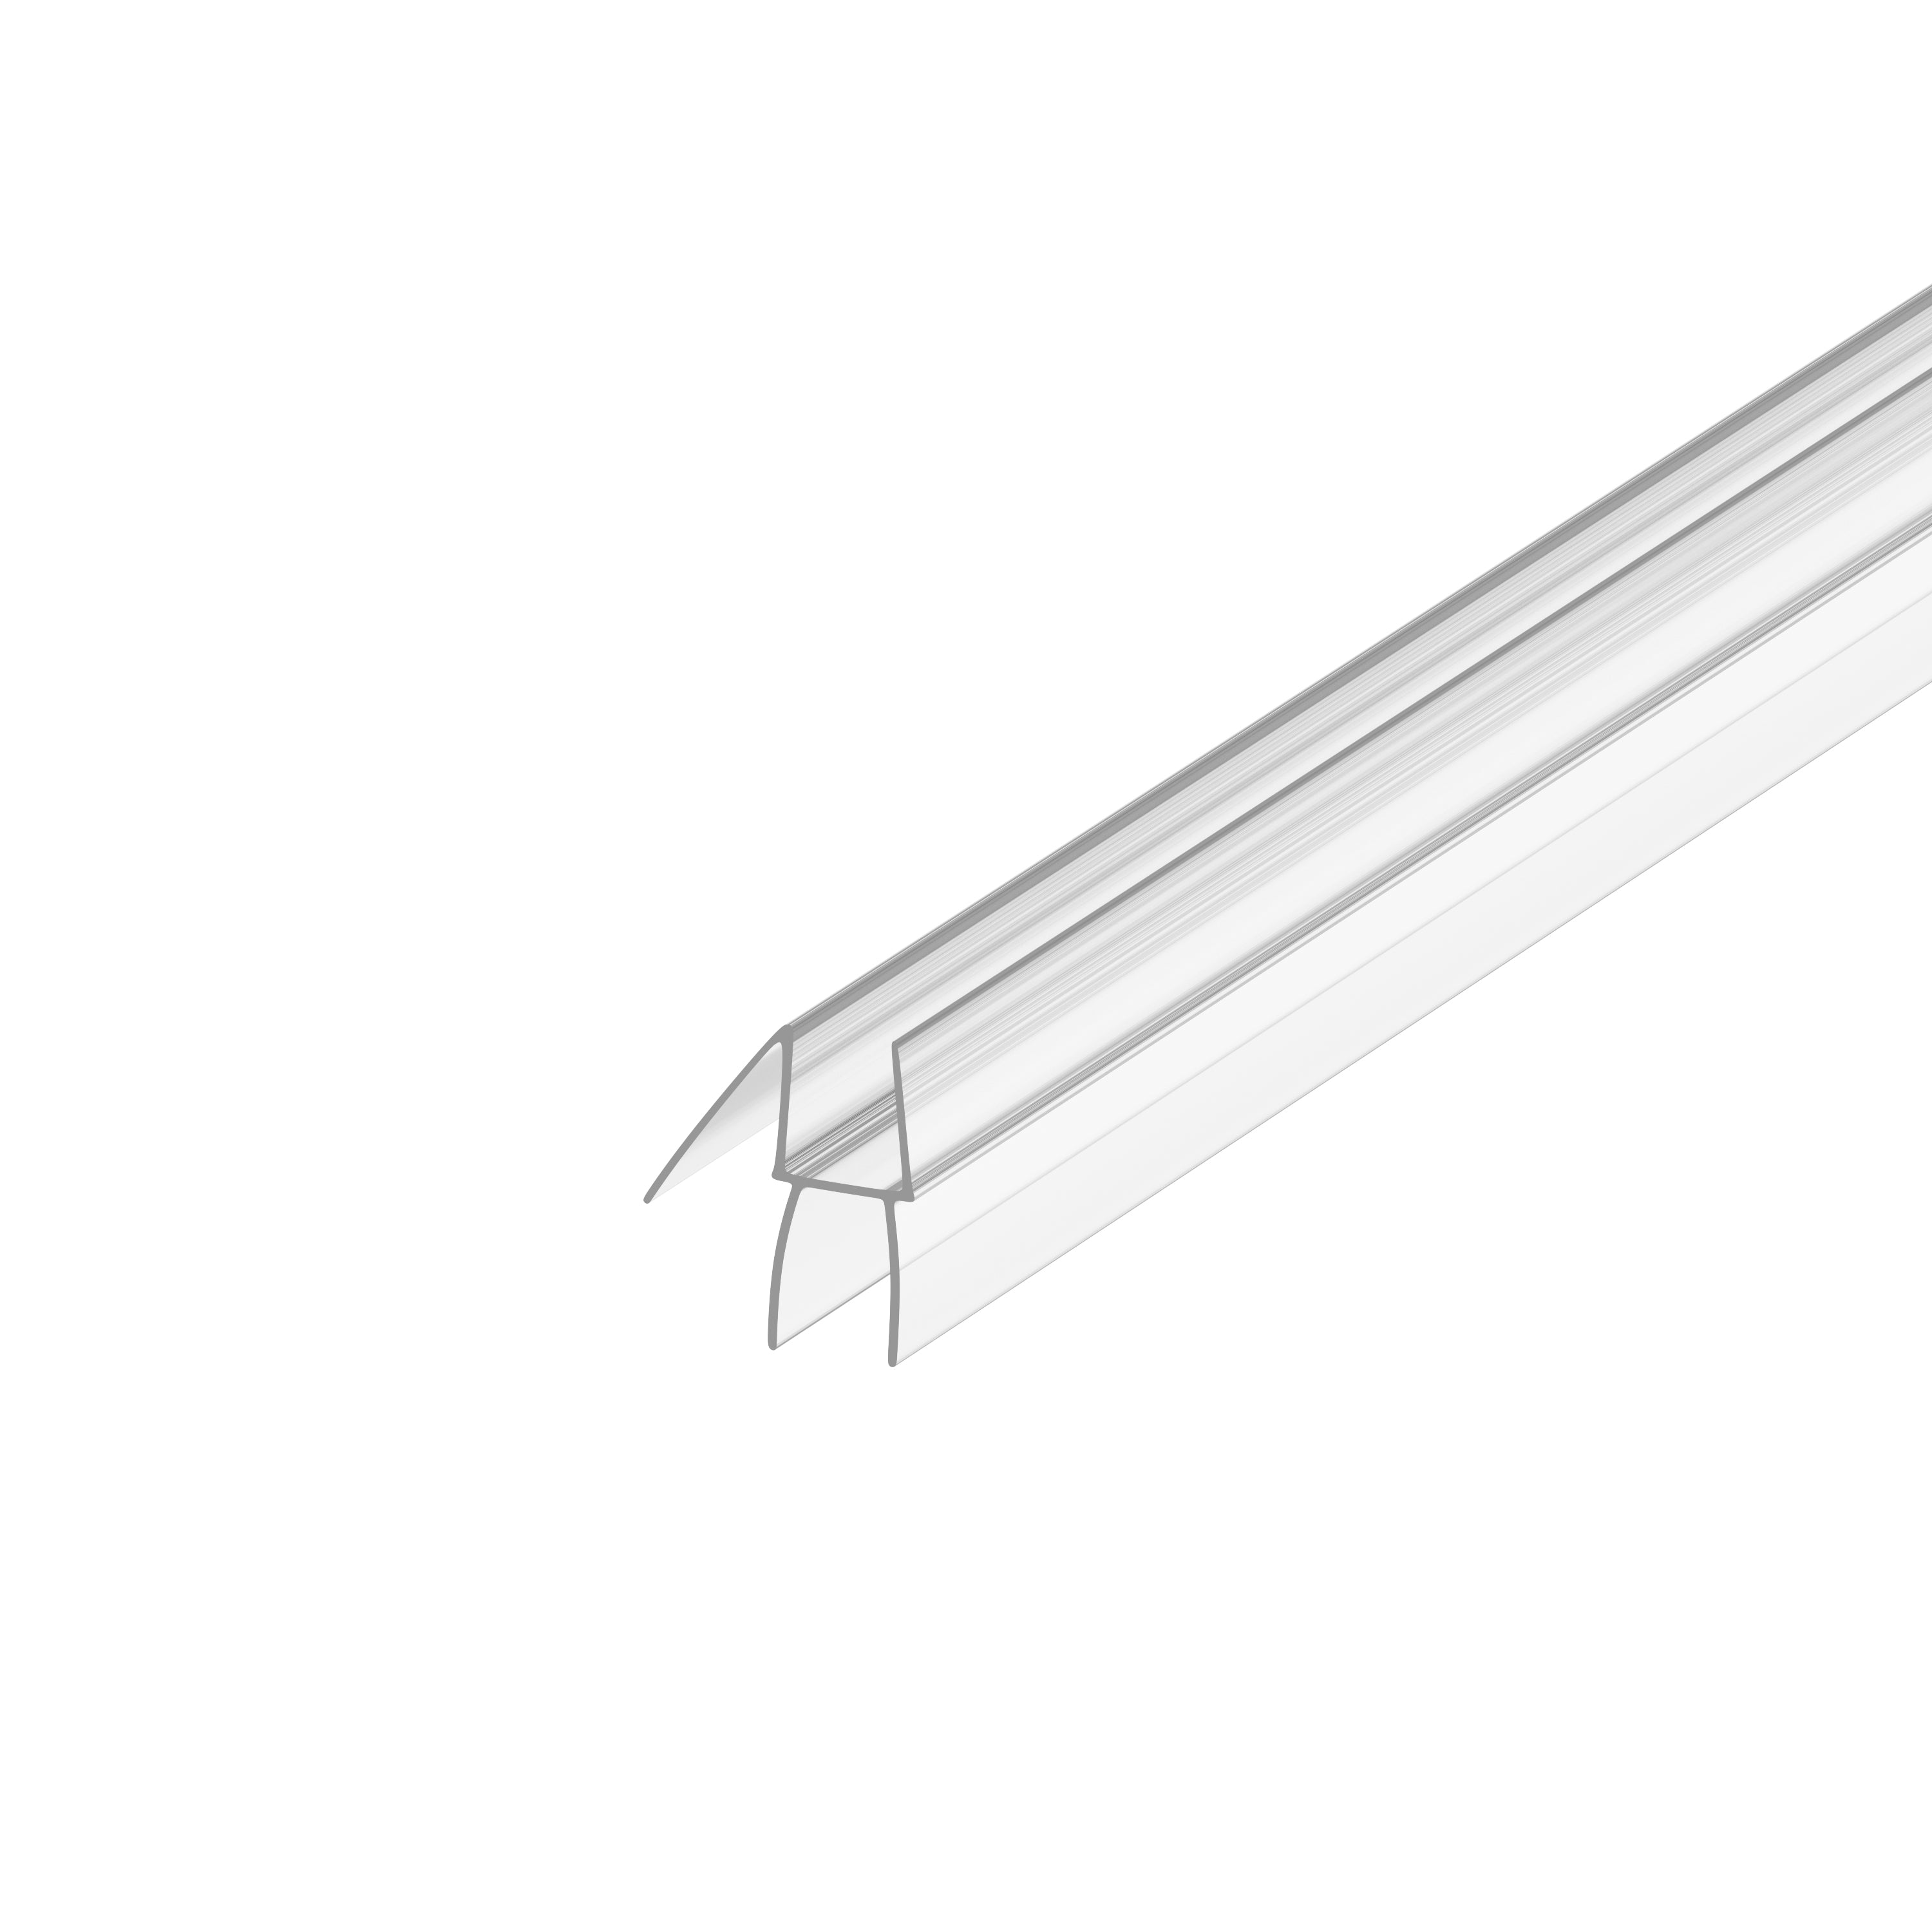 95” Co-Extruded Bottom Wipe with Drip Rail for 3/8” Glass